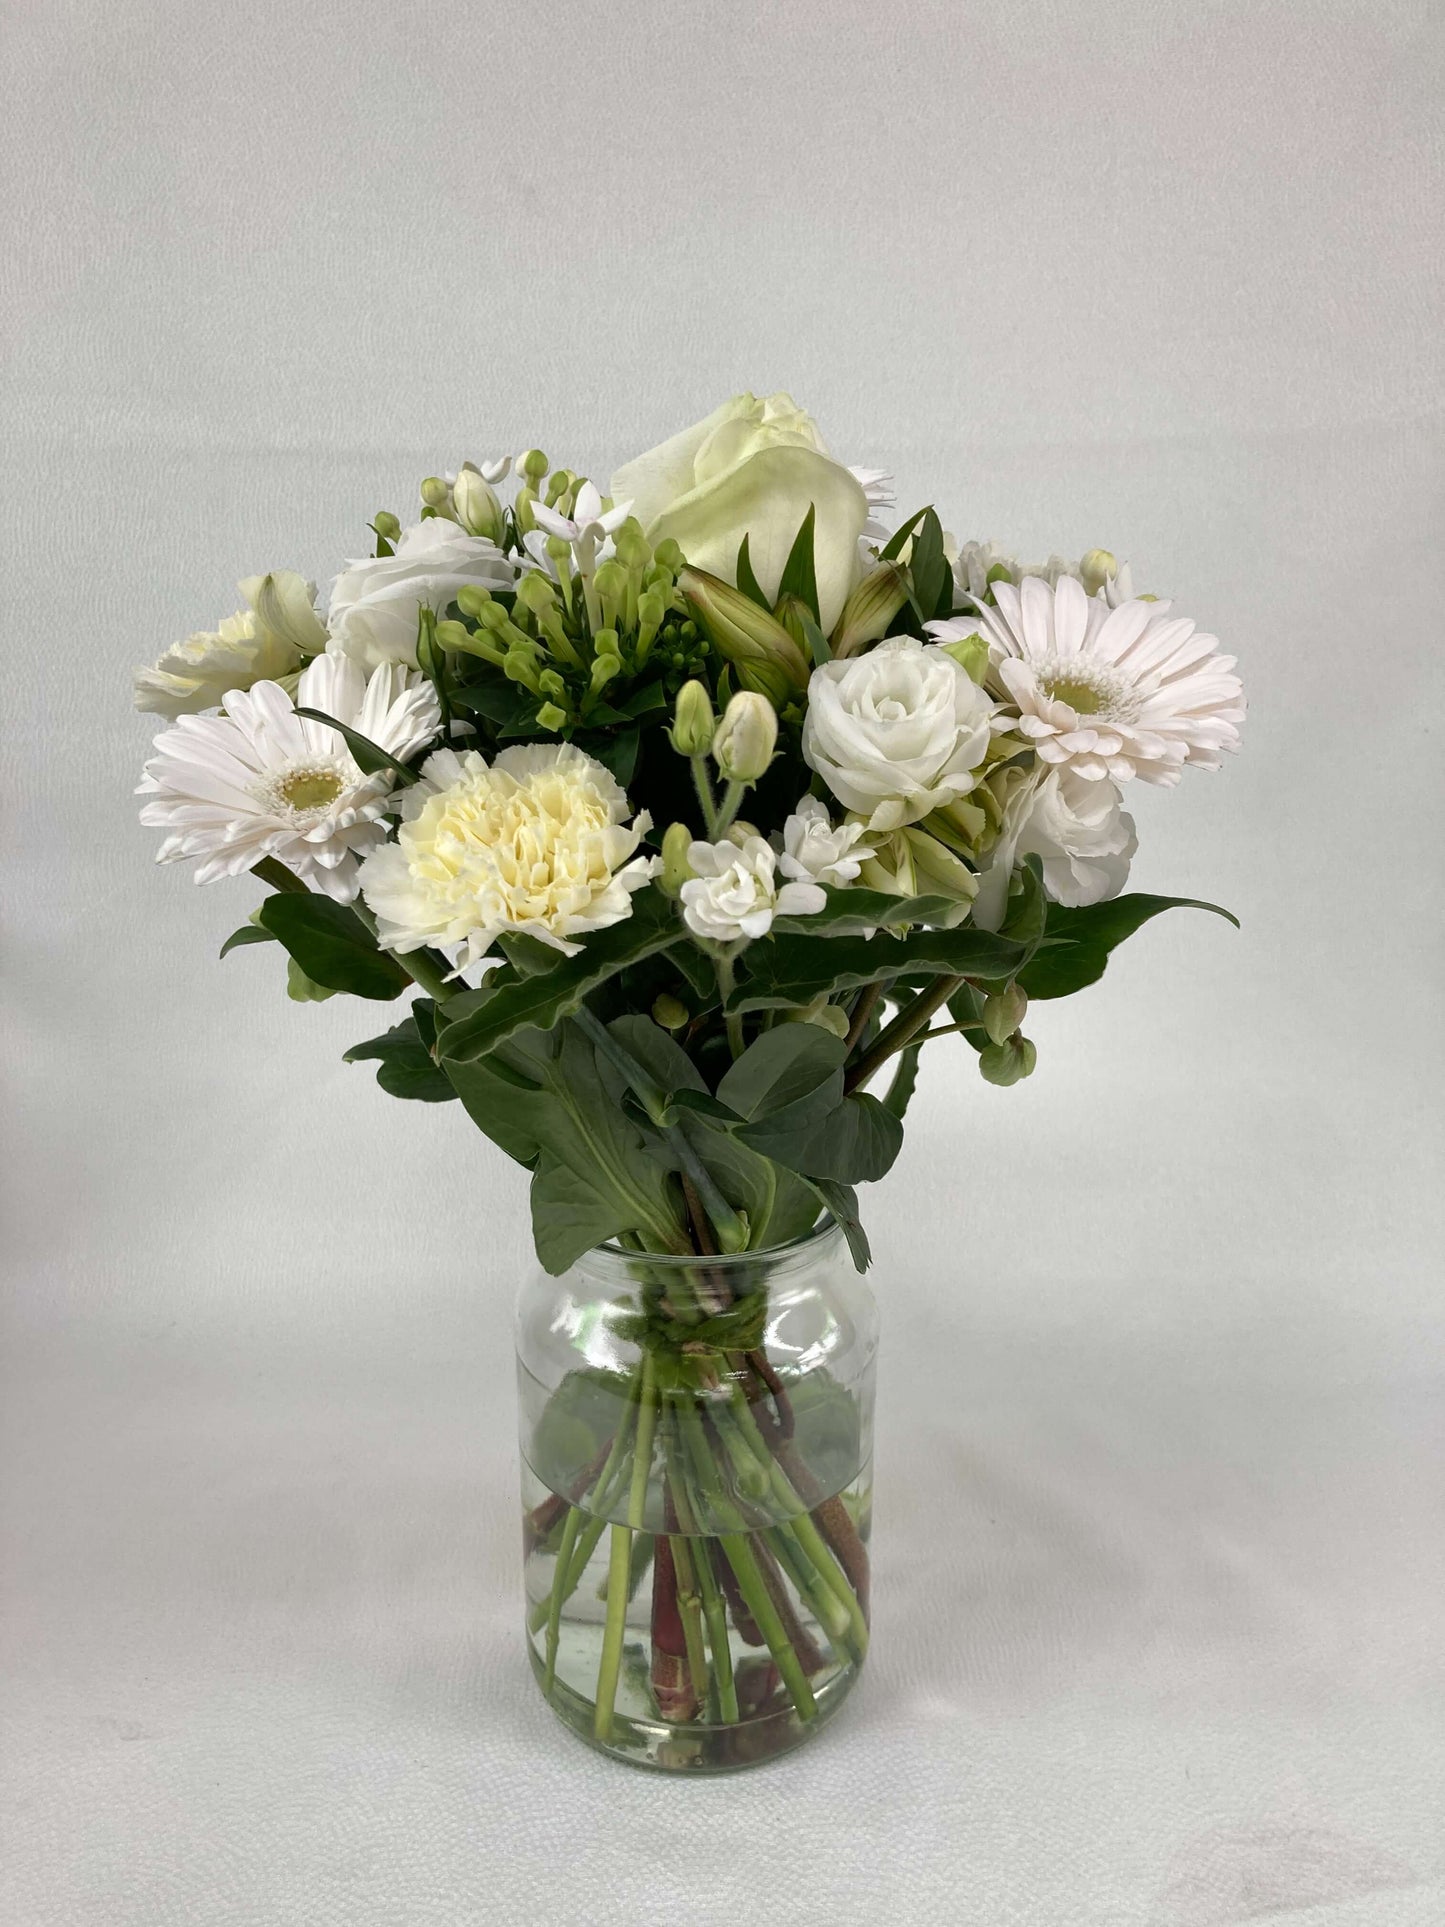 A white and green posy.